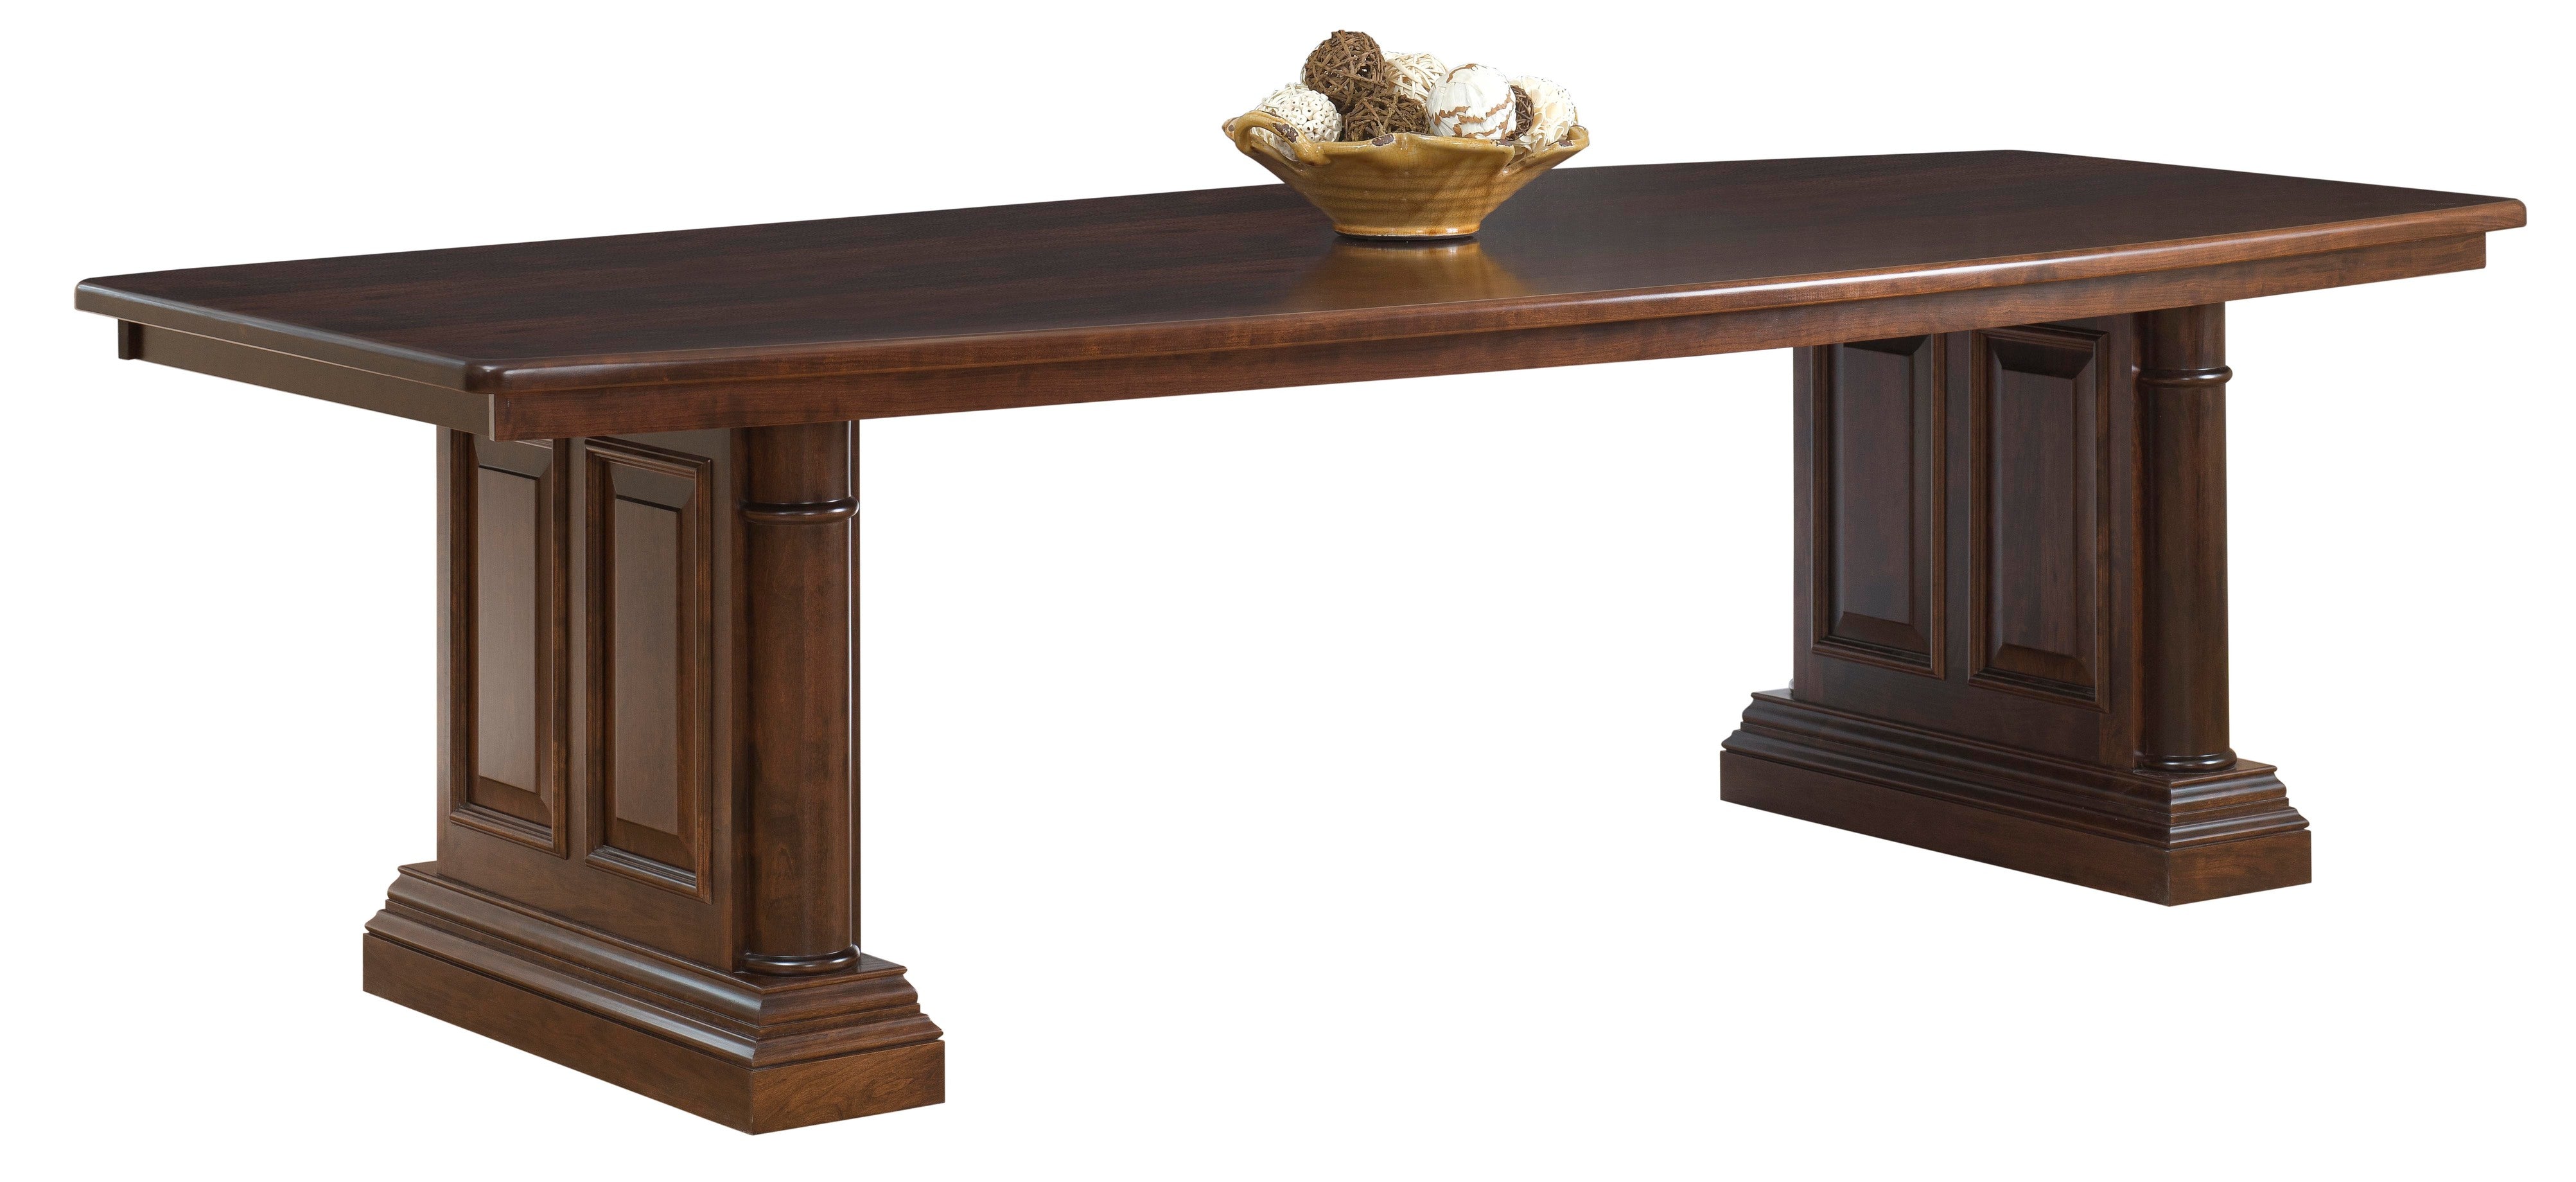 Amish Paris Conference Table